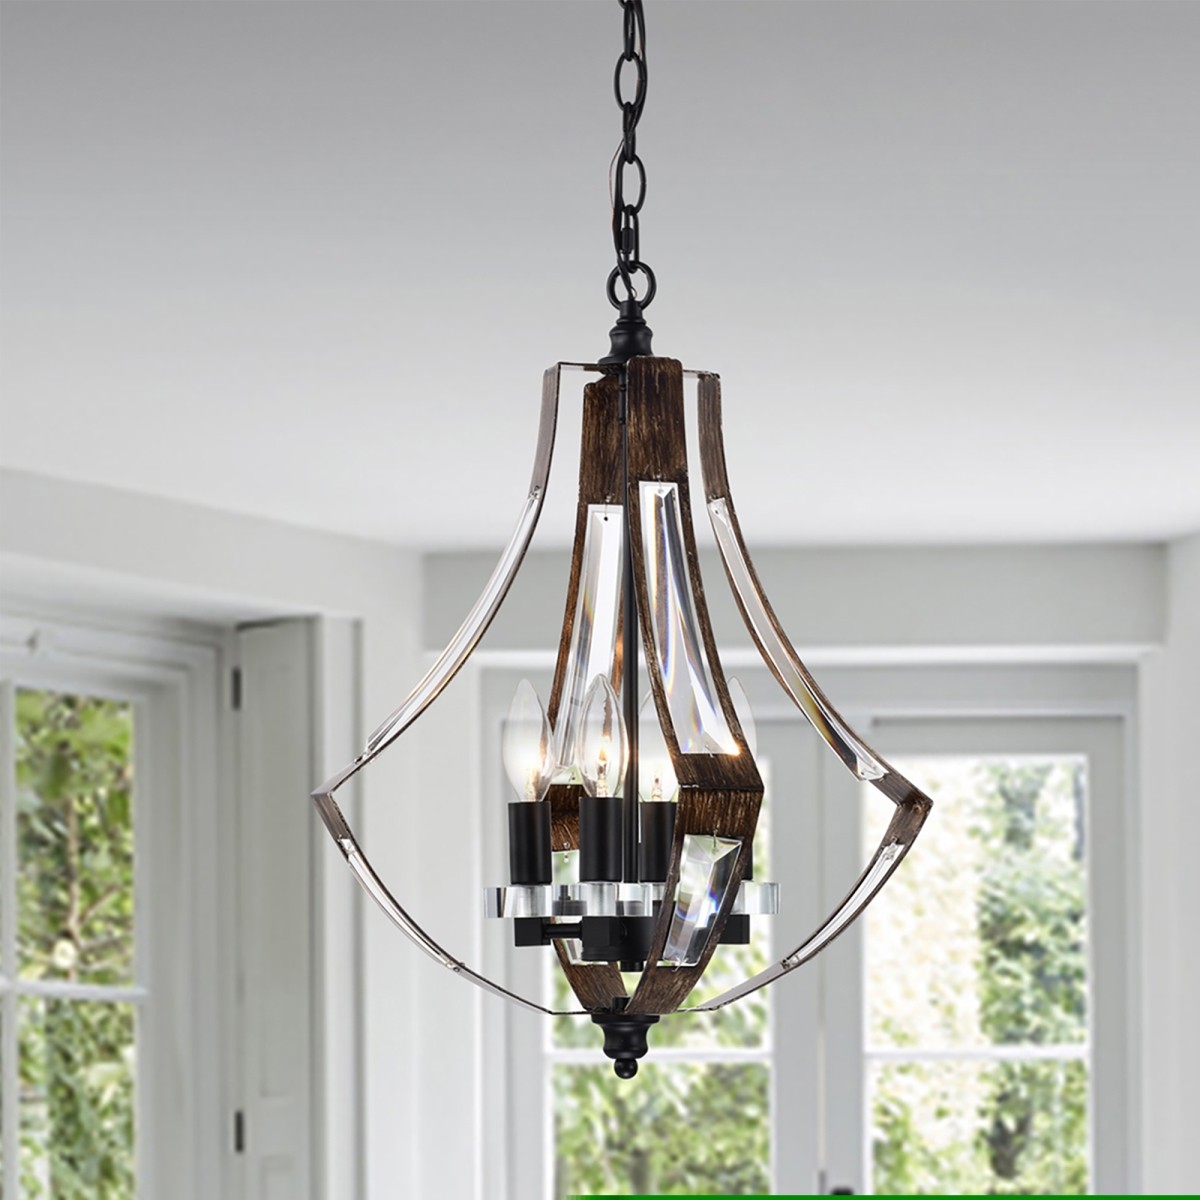 Fabiola 15 in. 4-Light Indoor Matte Black and Faux Wood Grain Finish Chandelier with Light Kit